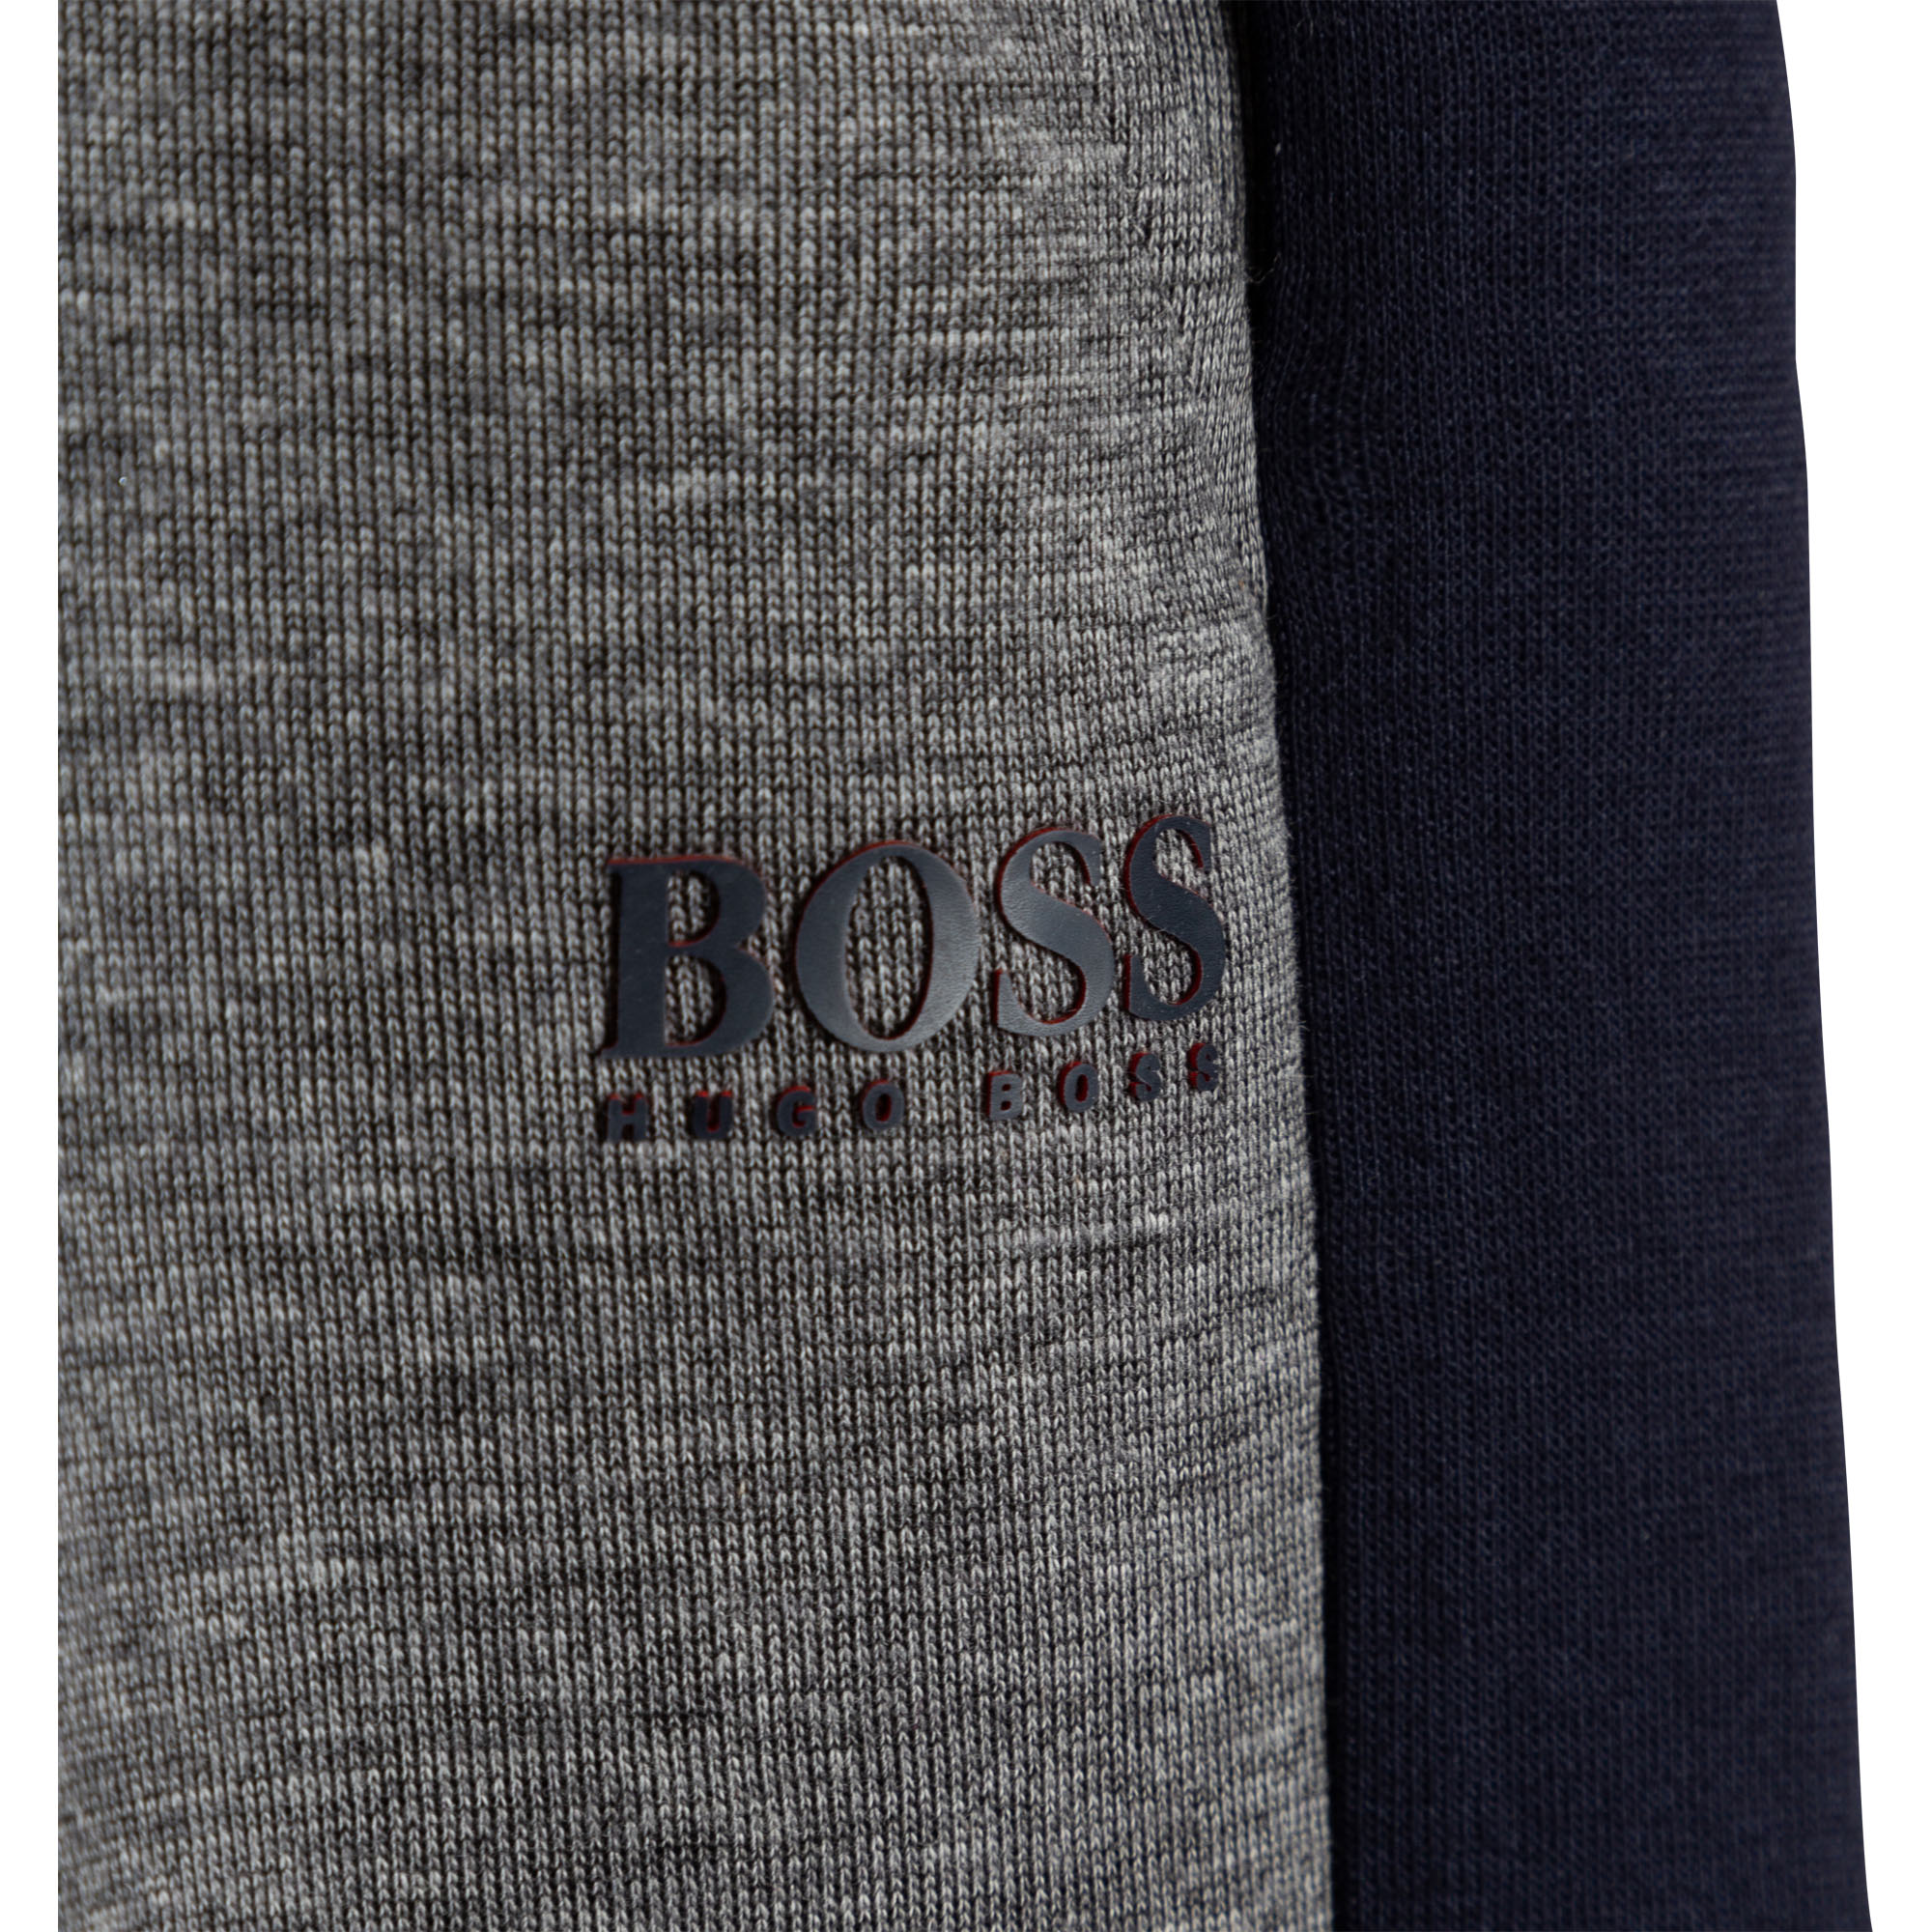 Cotton joggers BOSS for BOY